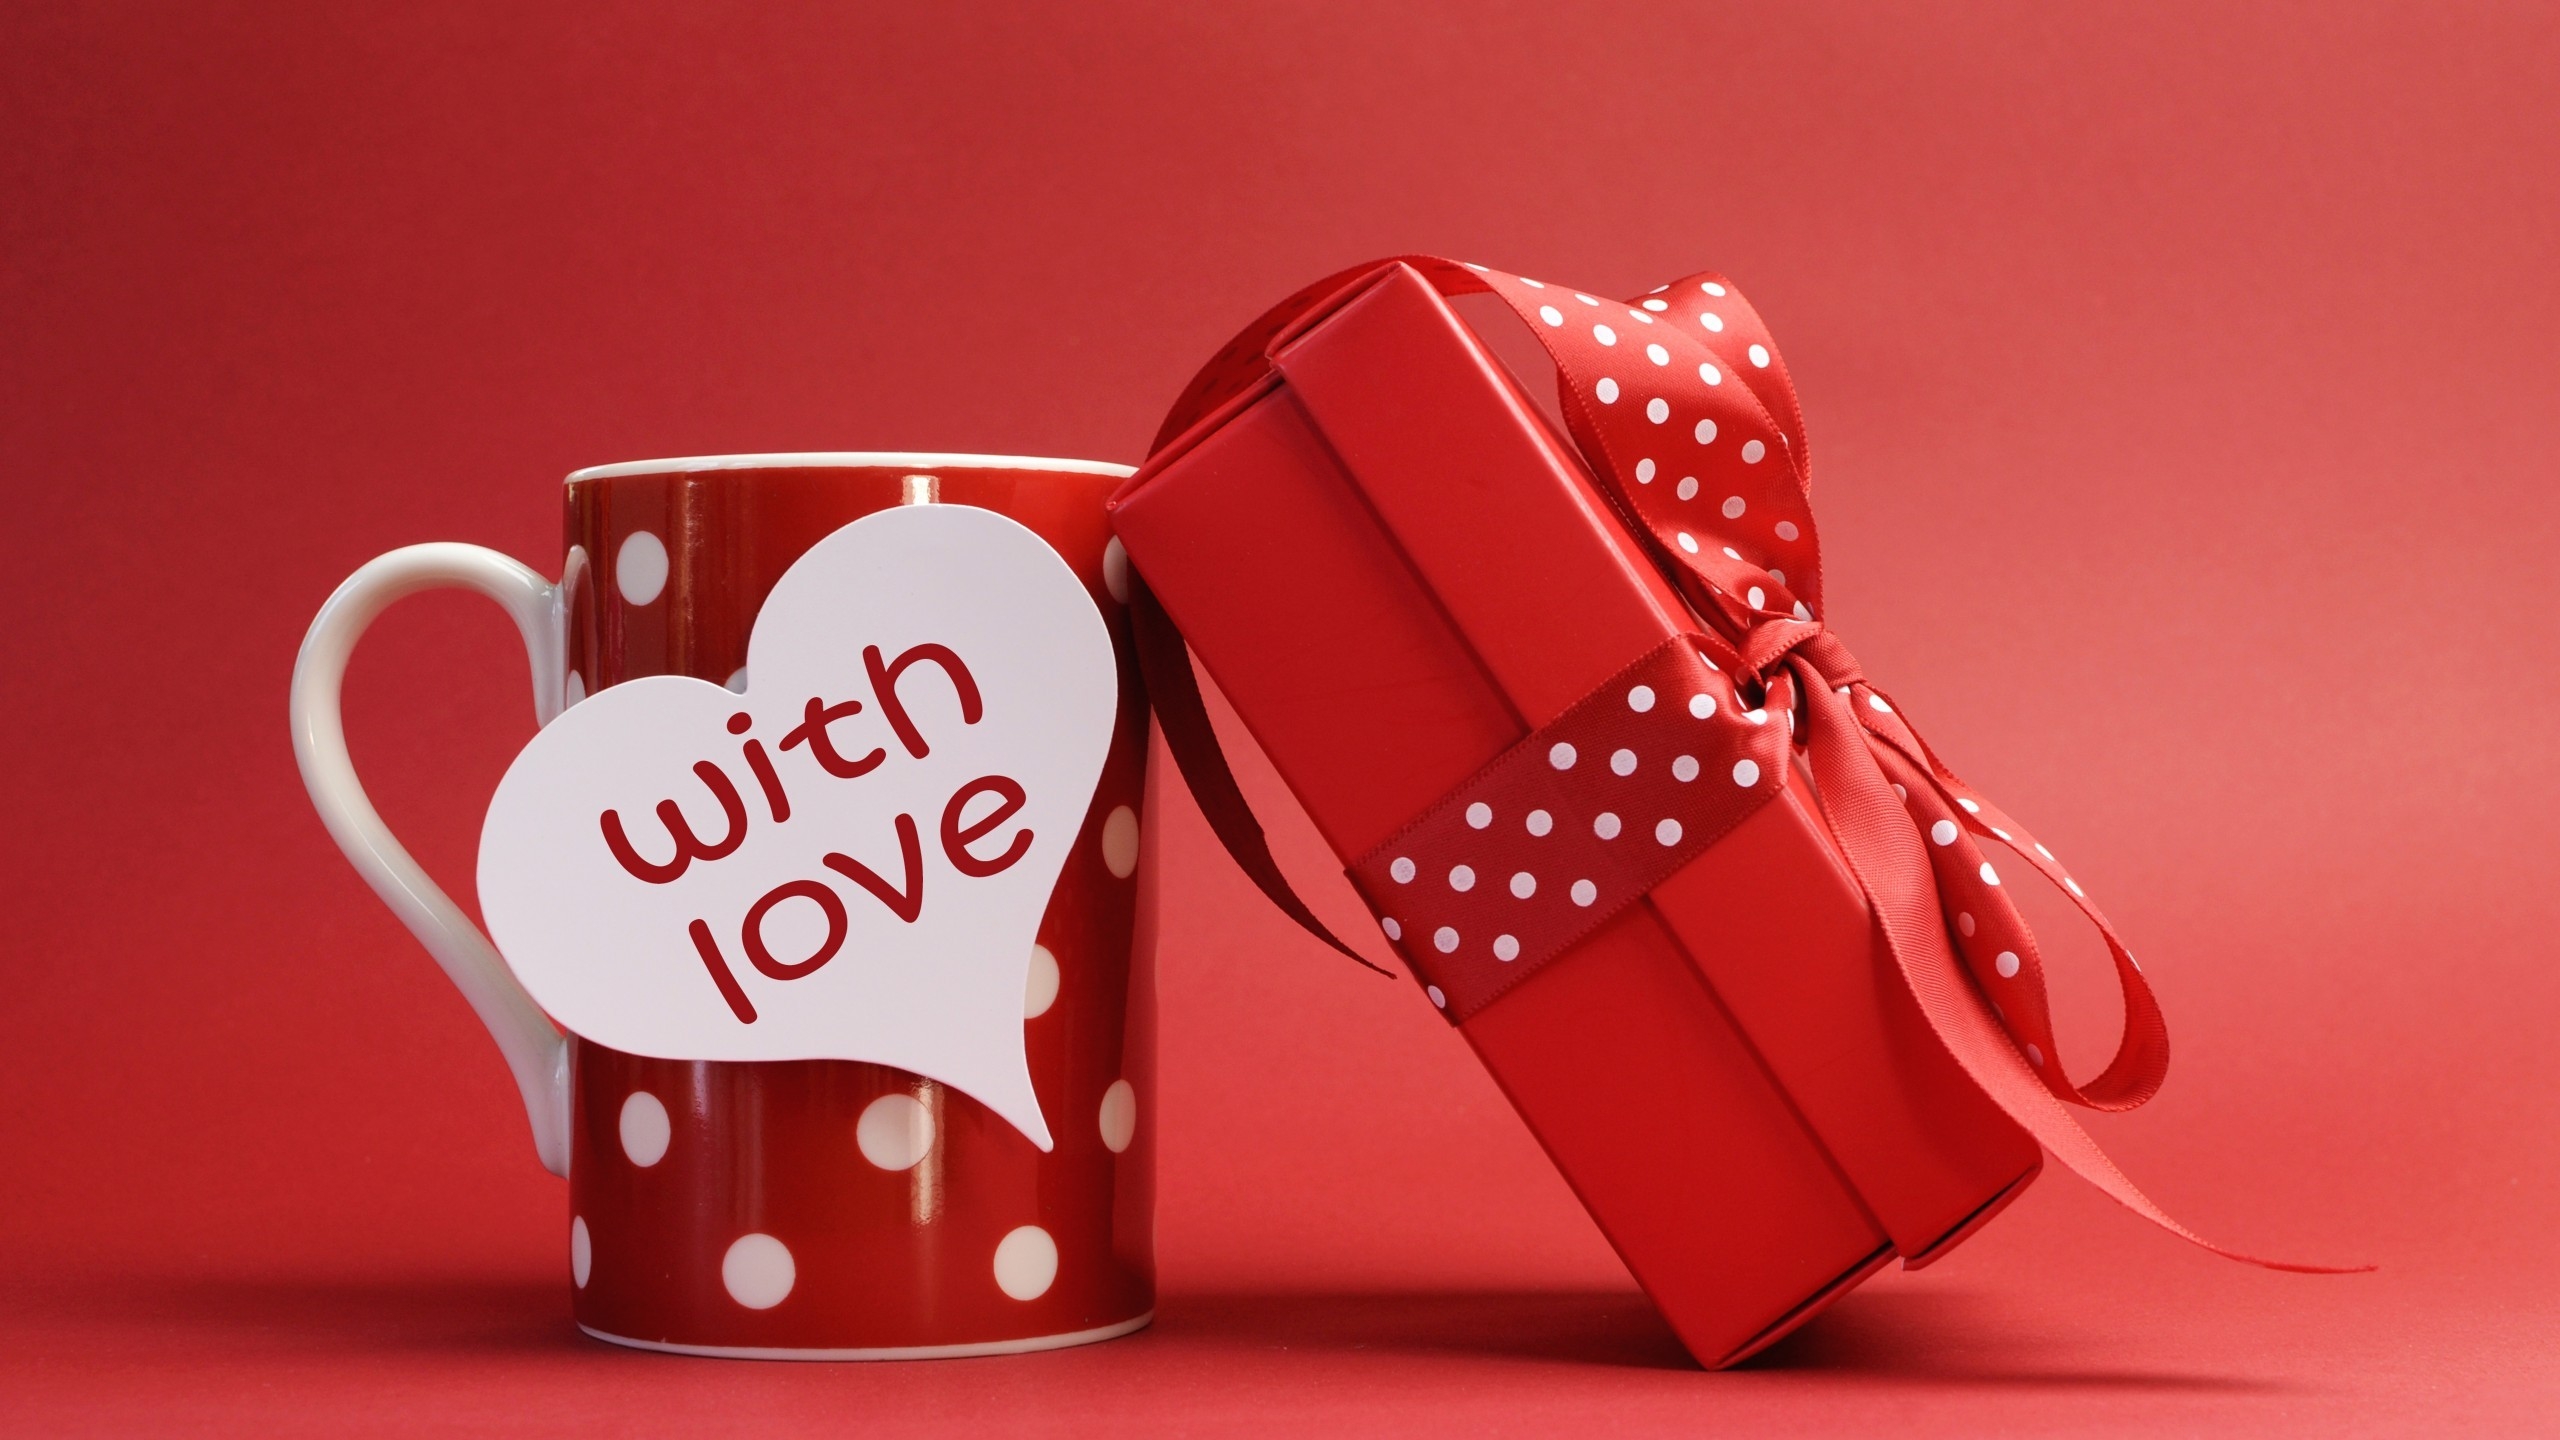 Gift With Love for 2560x1440 HDTV resolution